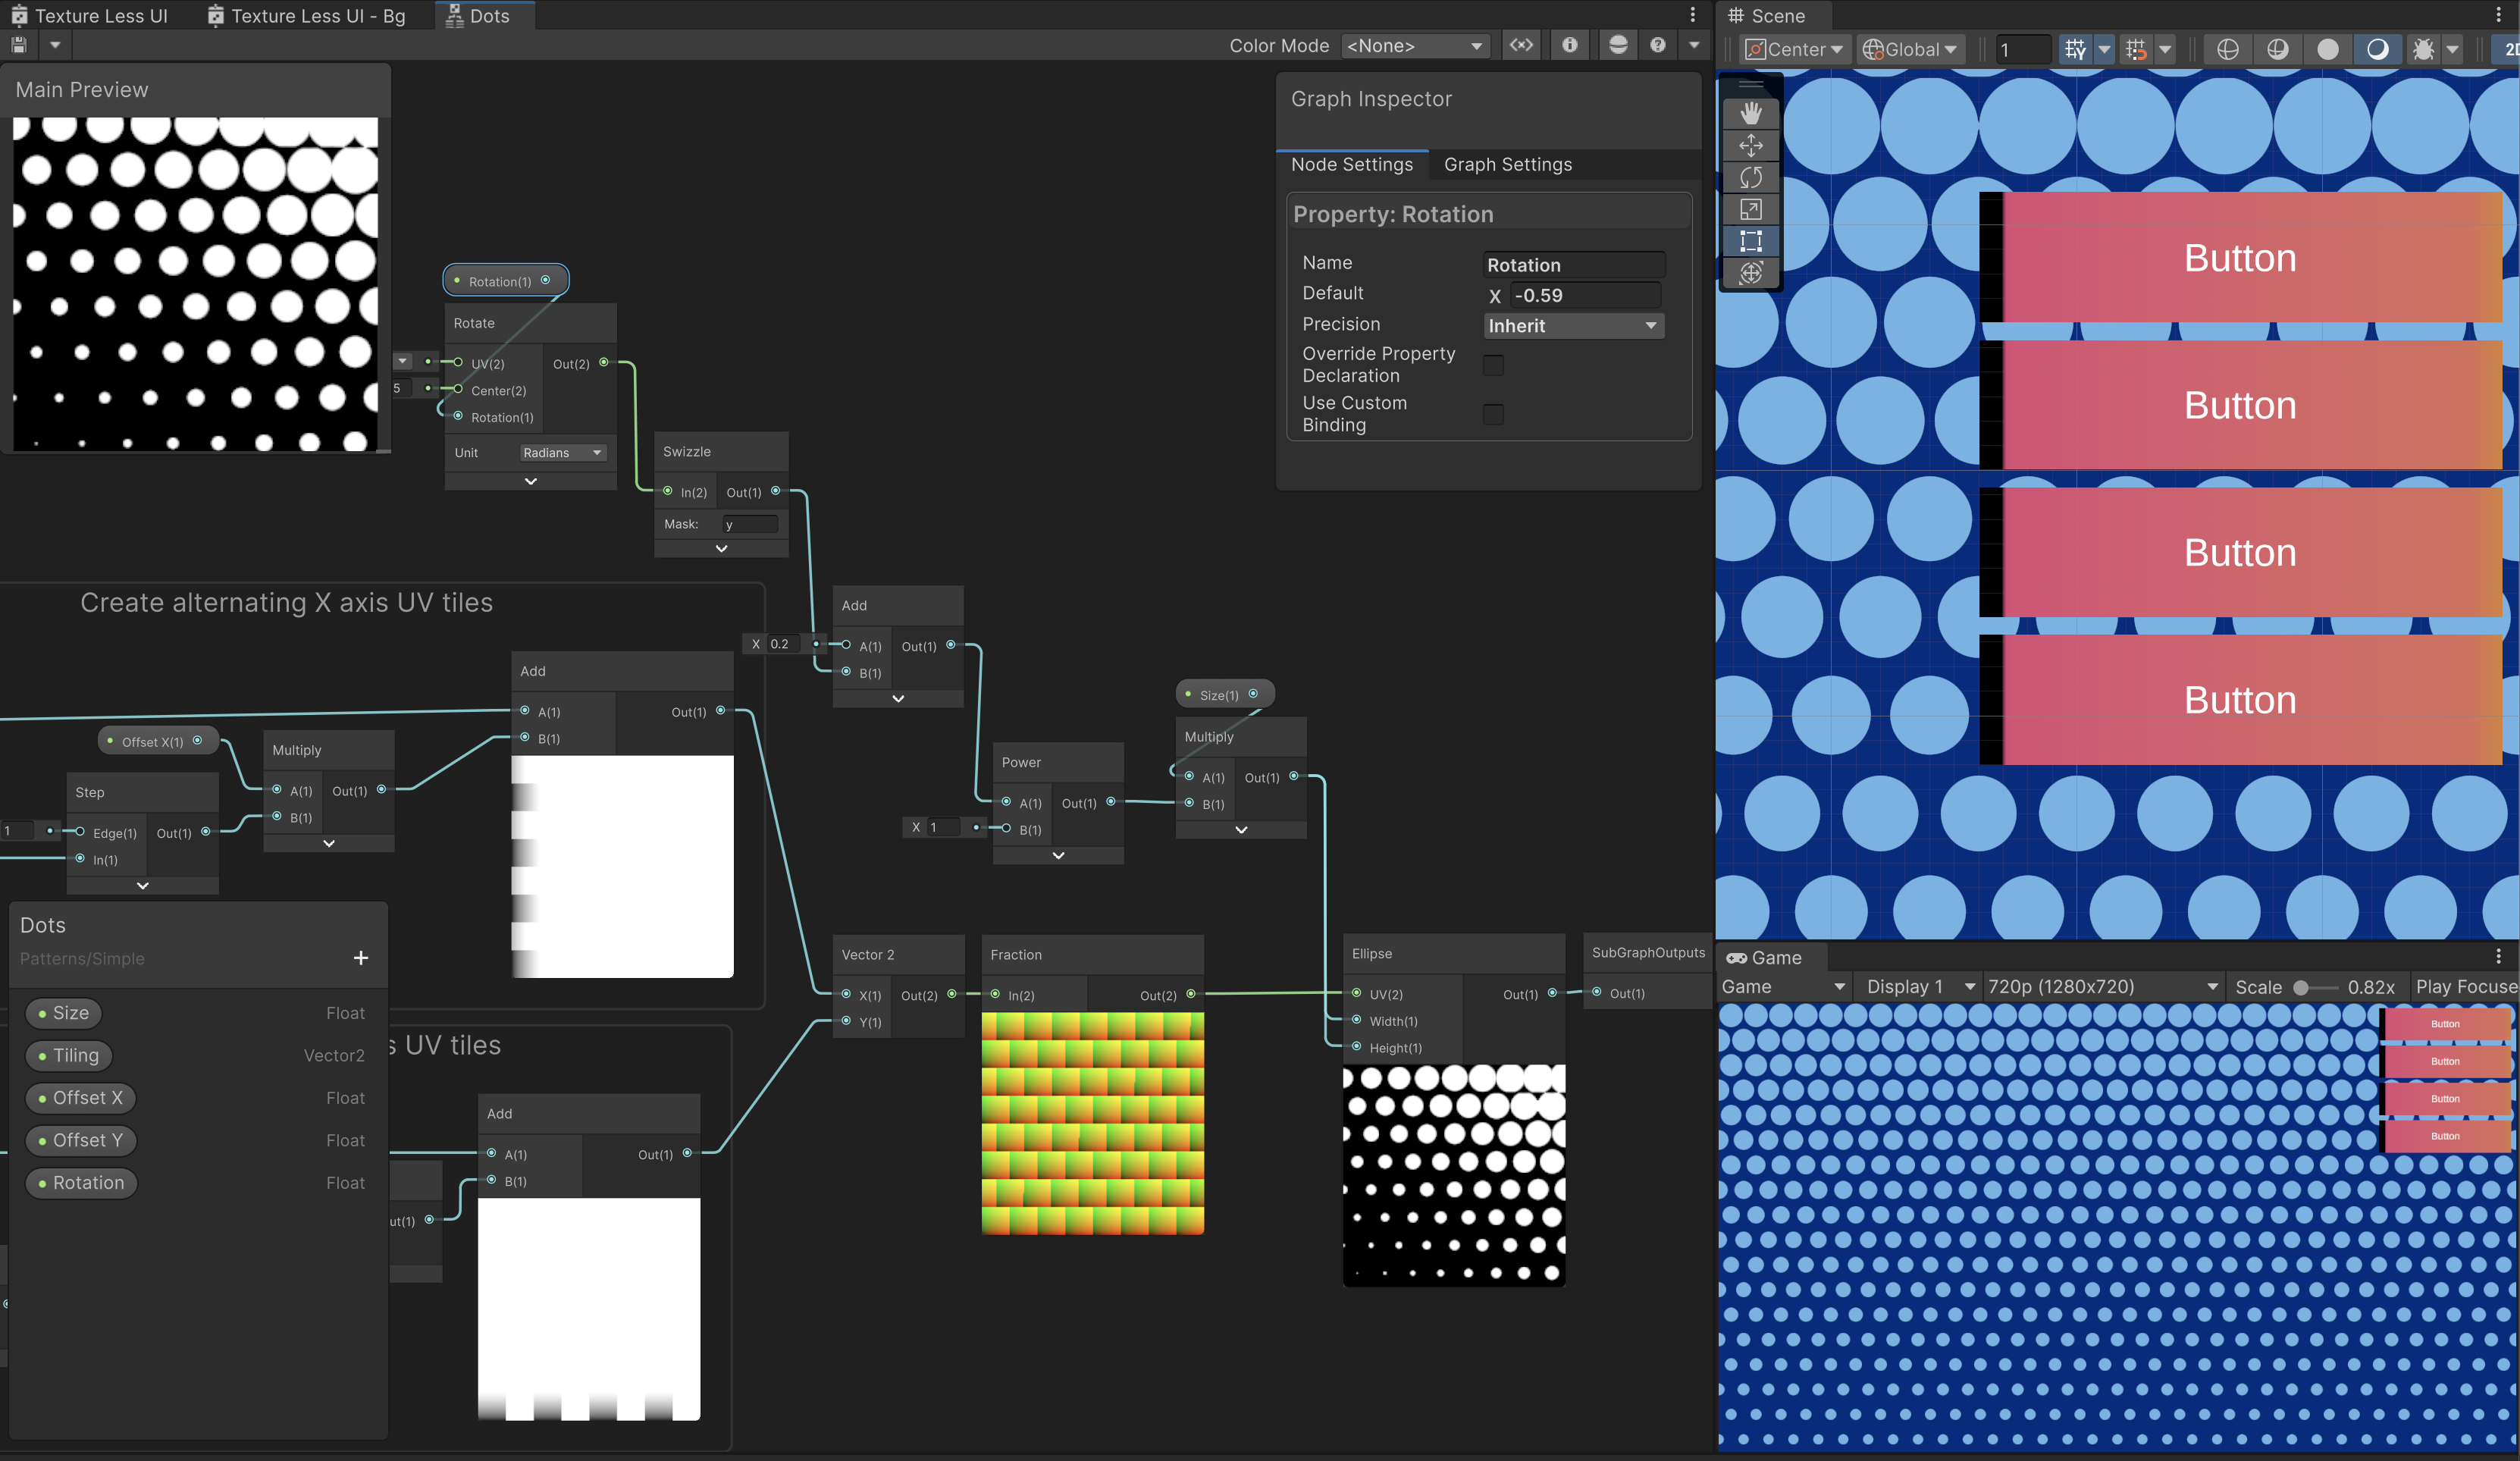 You can now select Canvas as a new Material Type in the Graph Inspector for HDRP, URP, and the Built-in Render Pipeline.